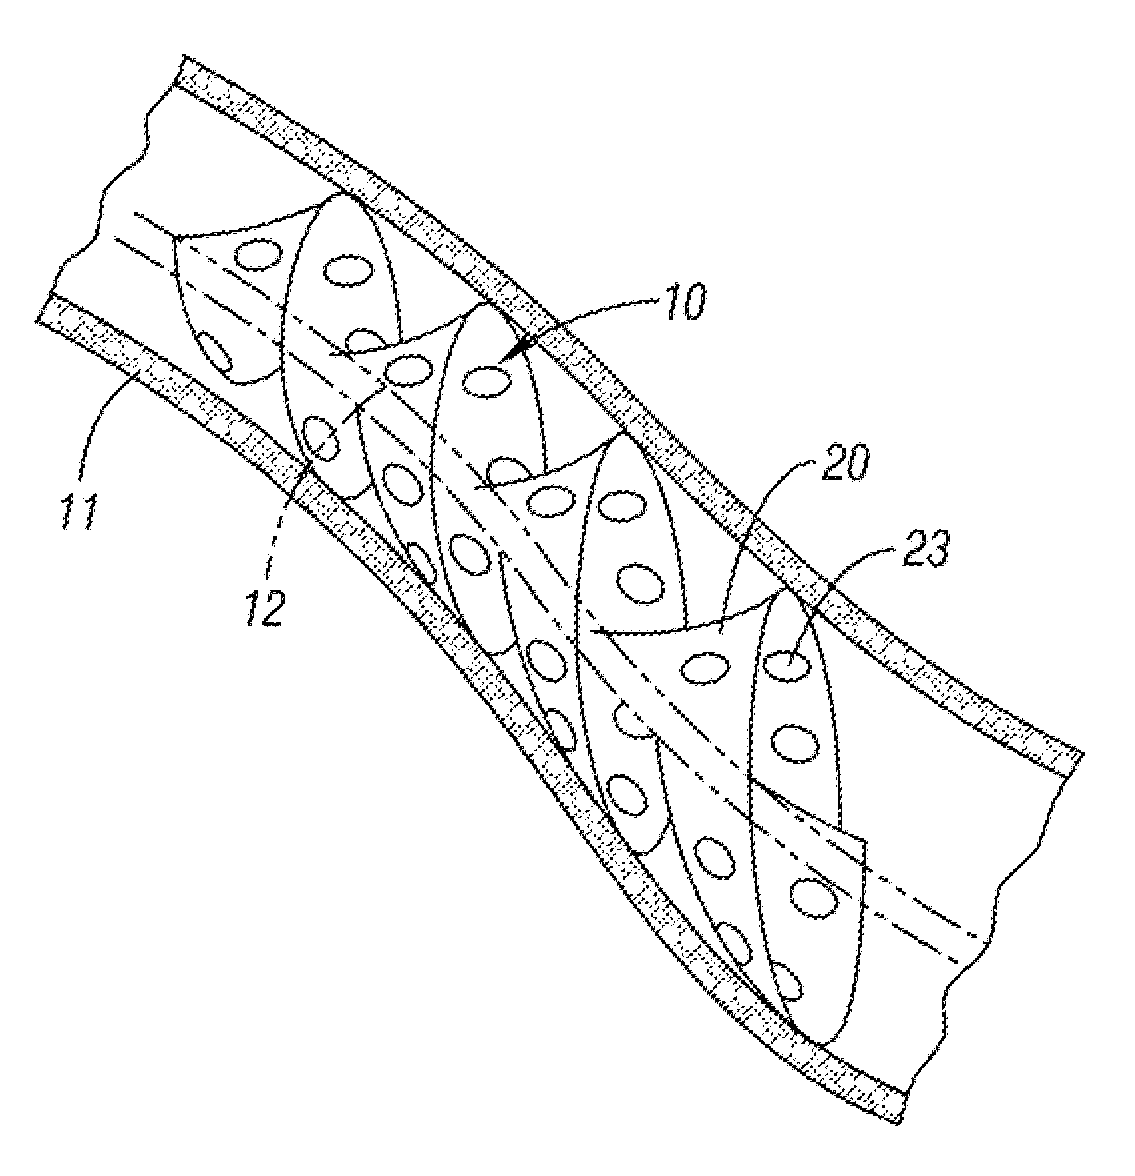 Helical embolic protection device